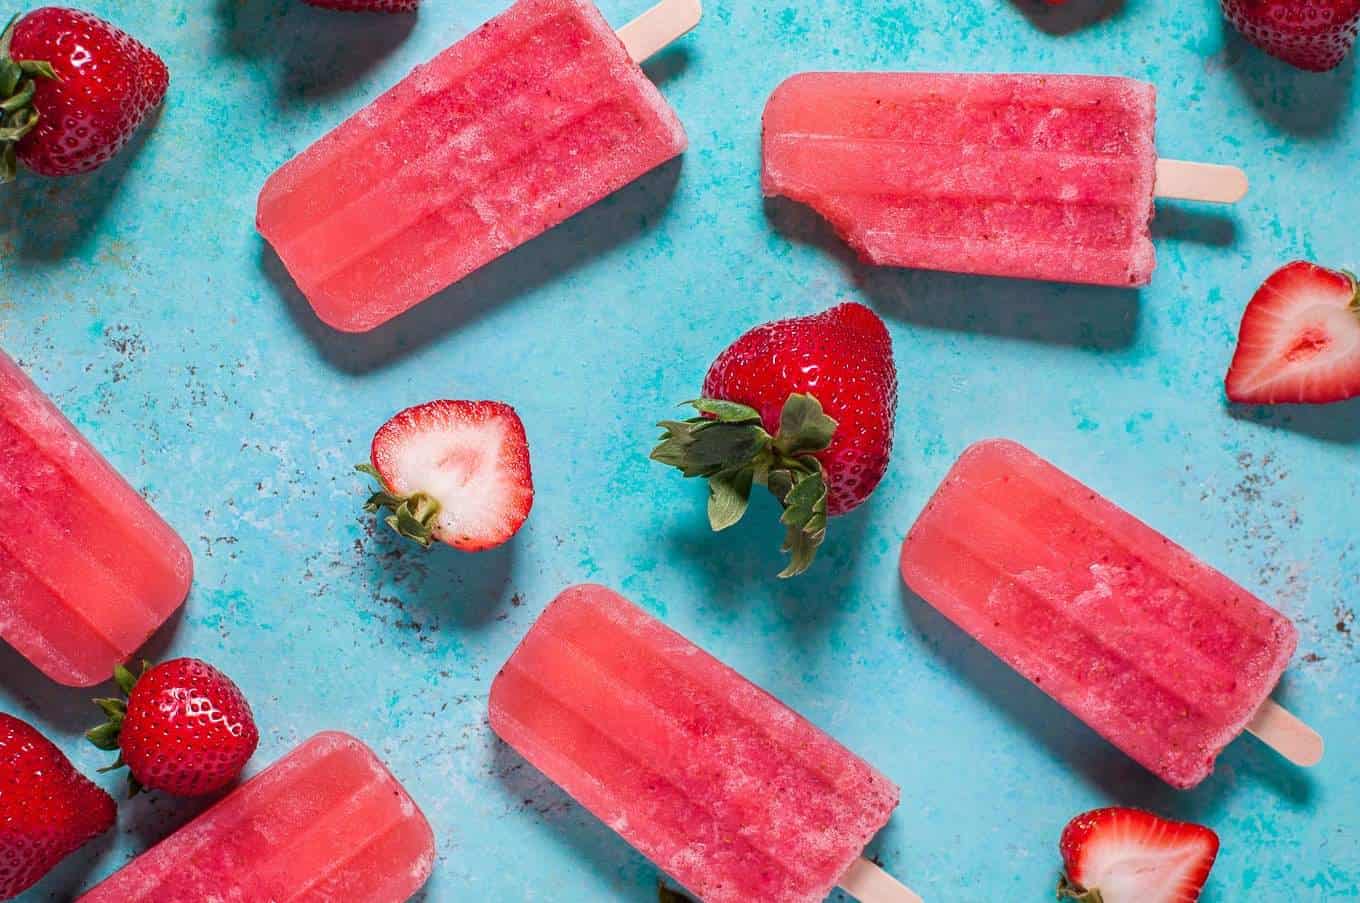 Strawberry Moscato Popsicles by Salt and Lavender and other amazing adult popsicle recipes!